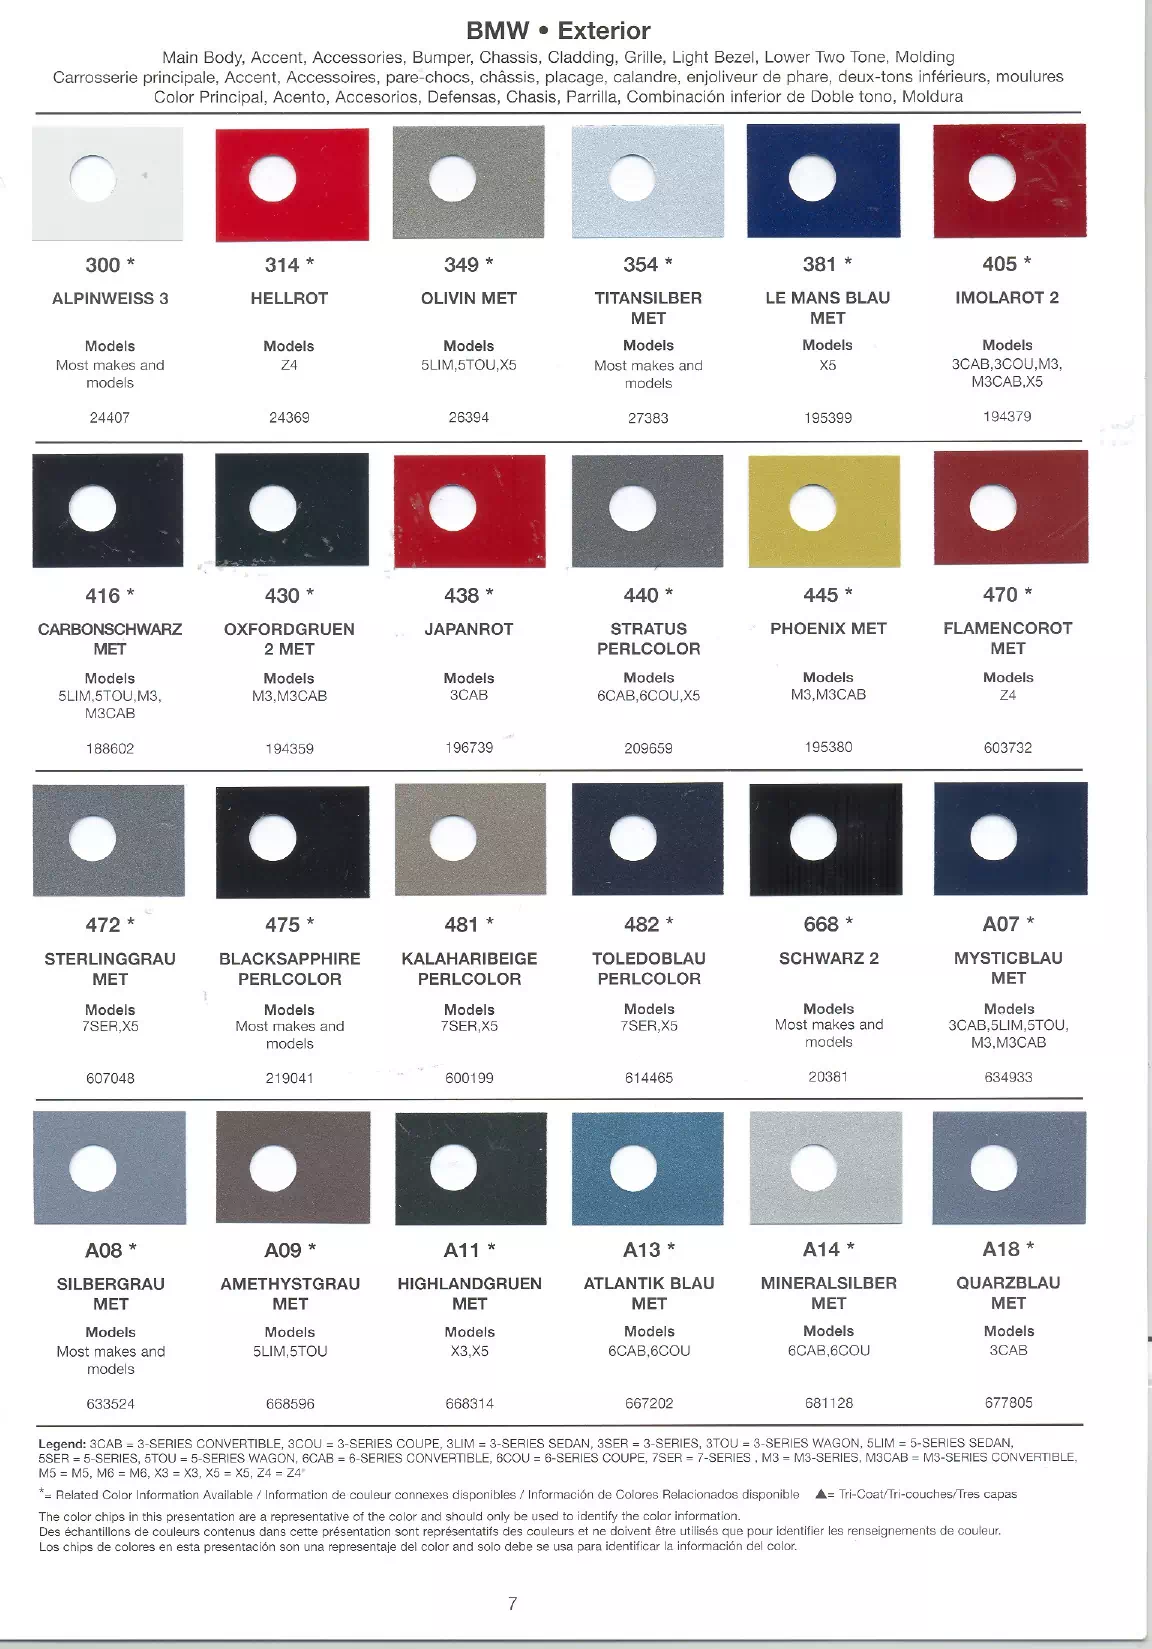 paint codes, color information, interior, exterior and accent colors for 2007 bmw's